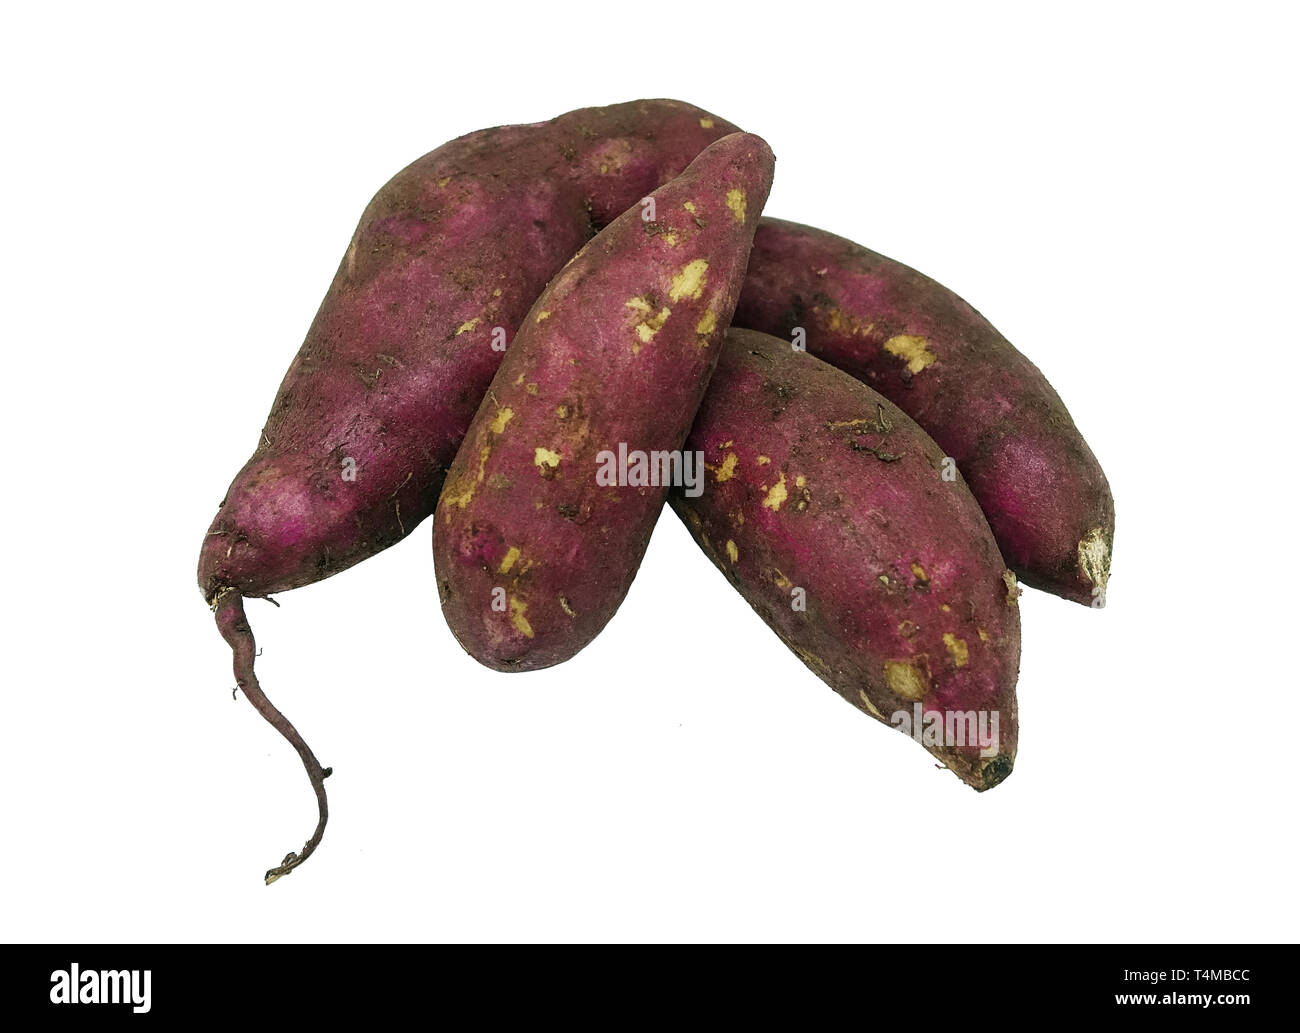 Purple sweet potato, large, starchy, sweet-tasting, tuberous roots and a root vegetable, isolated on white background. Stock Photo